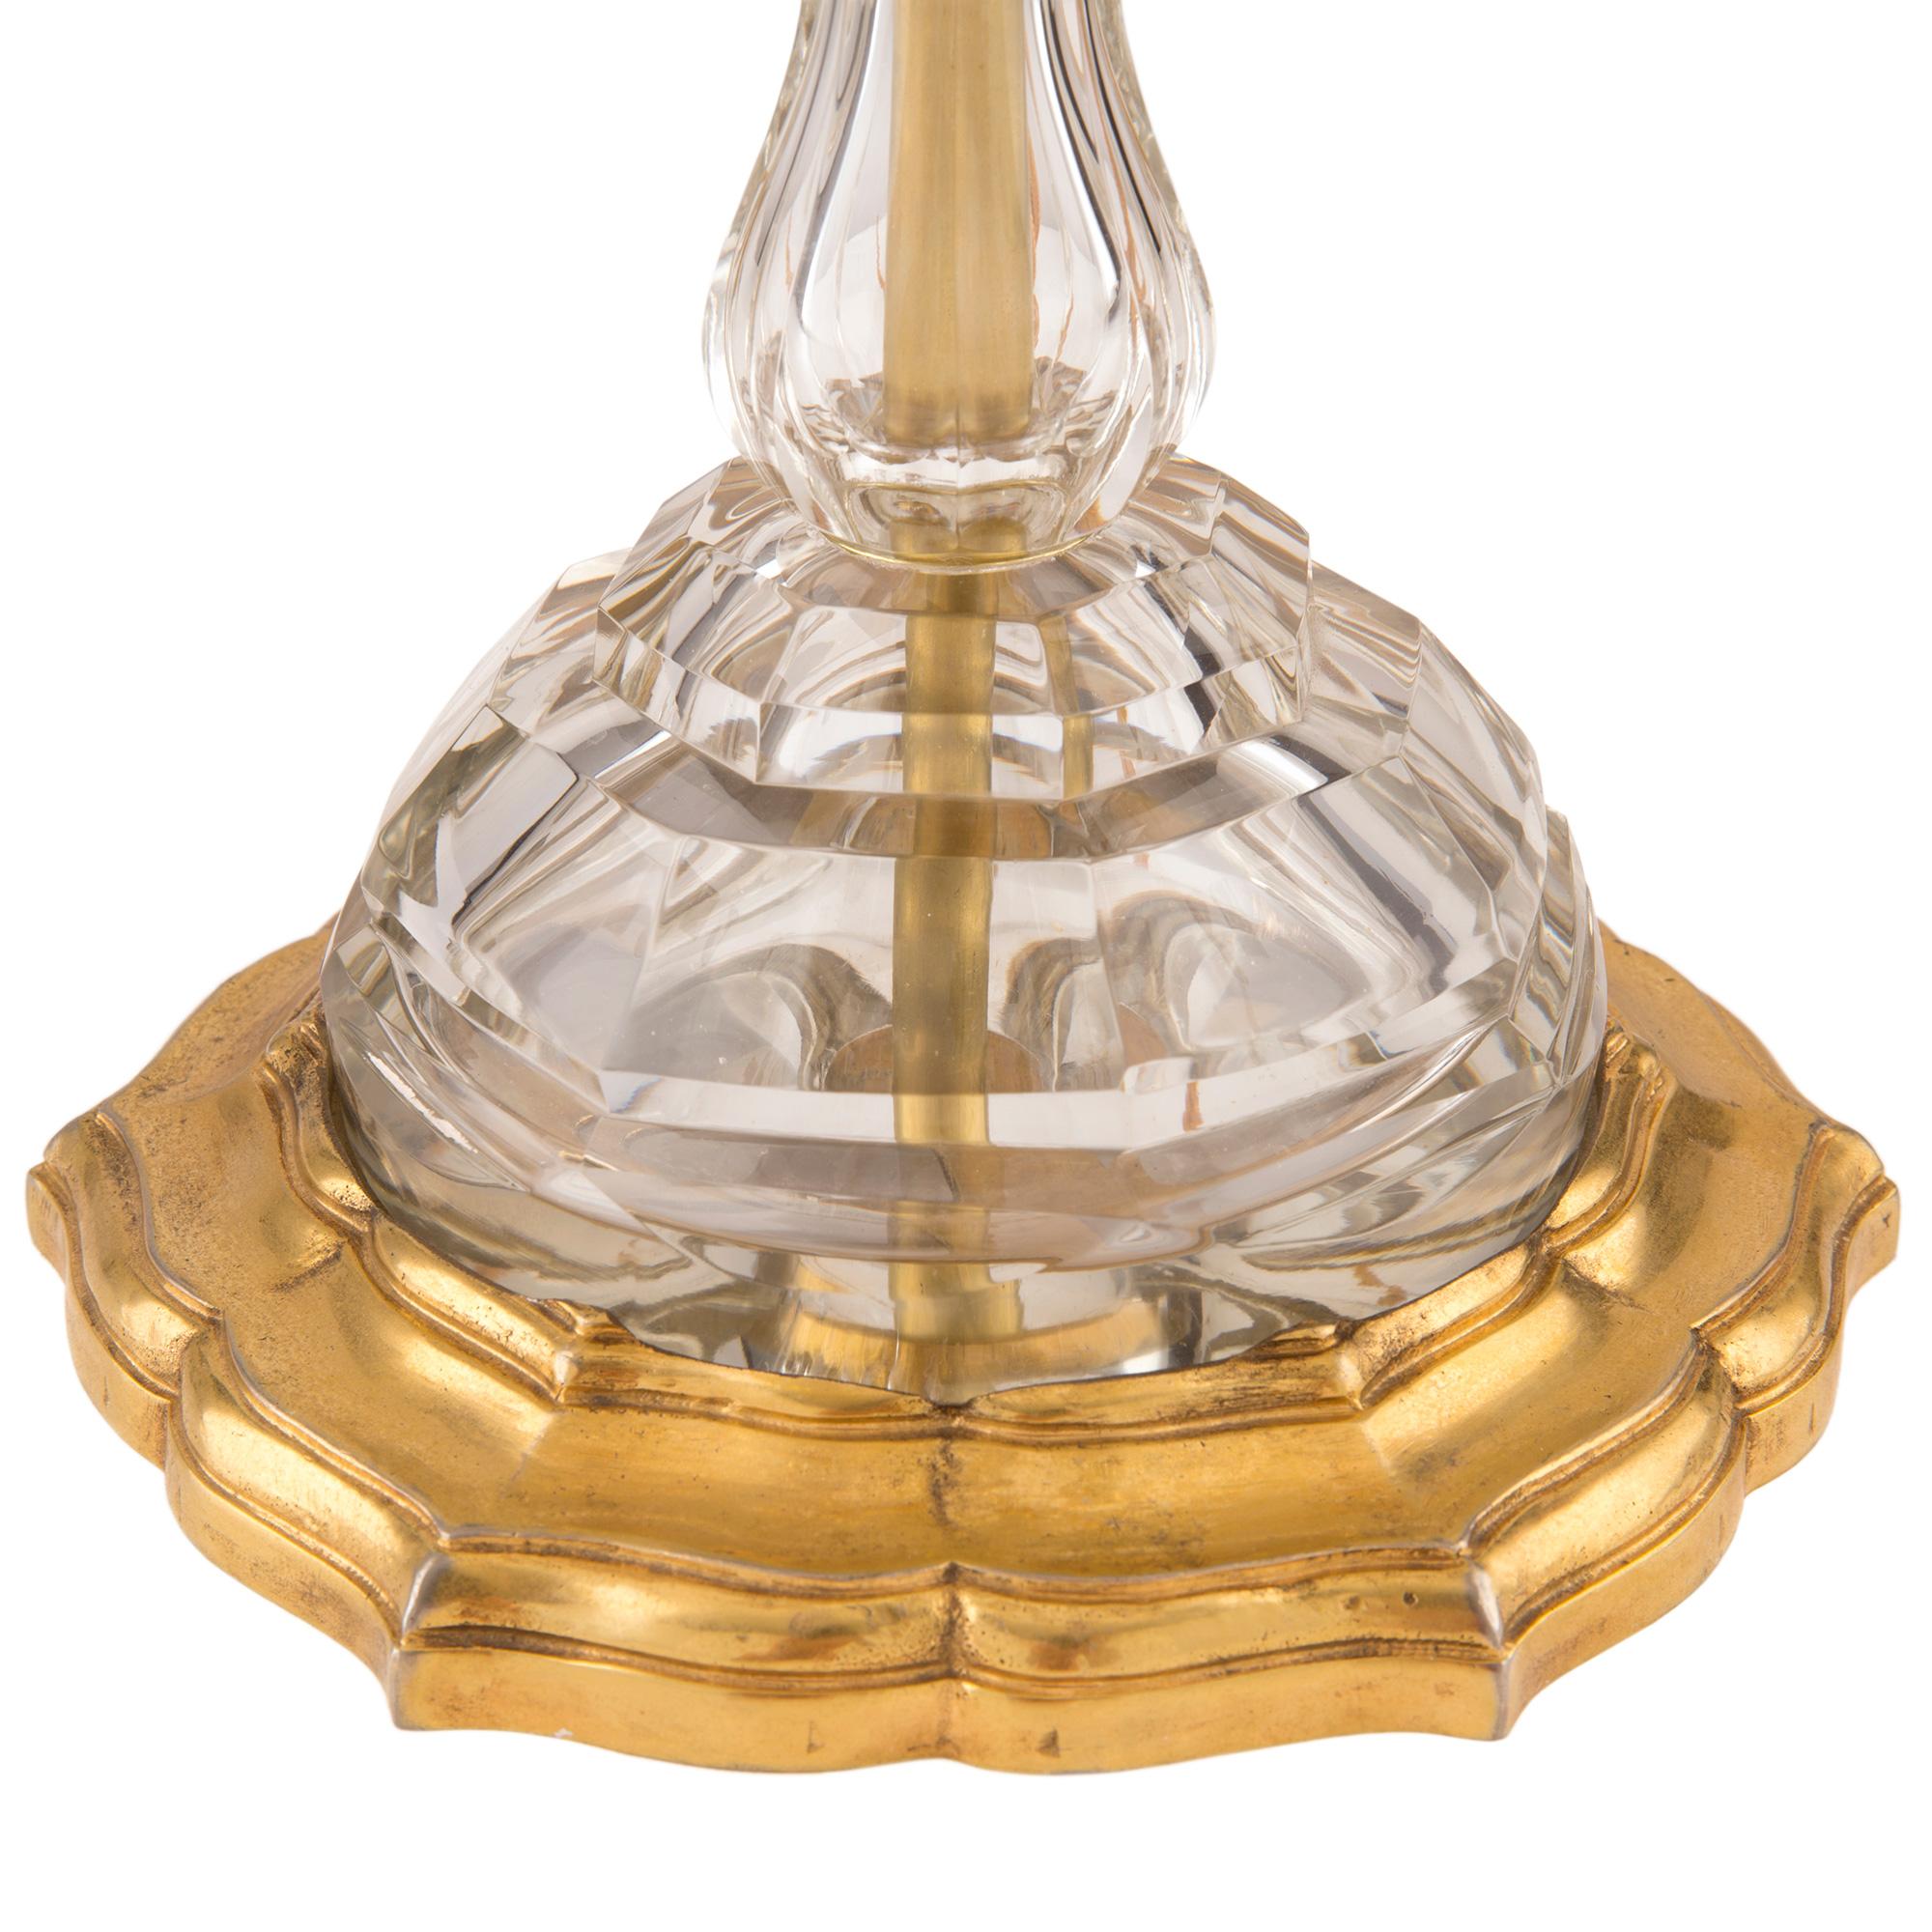 French 19th Century Louis XVI Style Ormolu and Baccarat Crystal Girandole Lamps For Sale 4